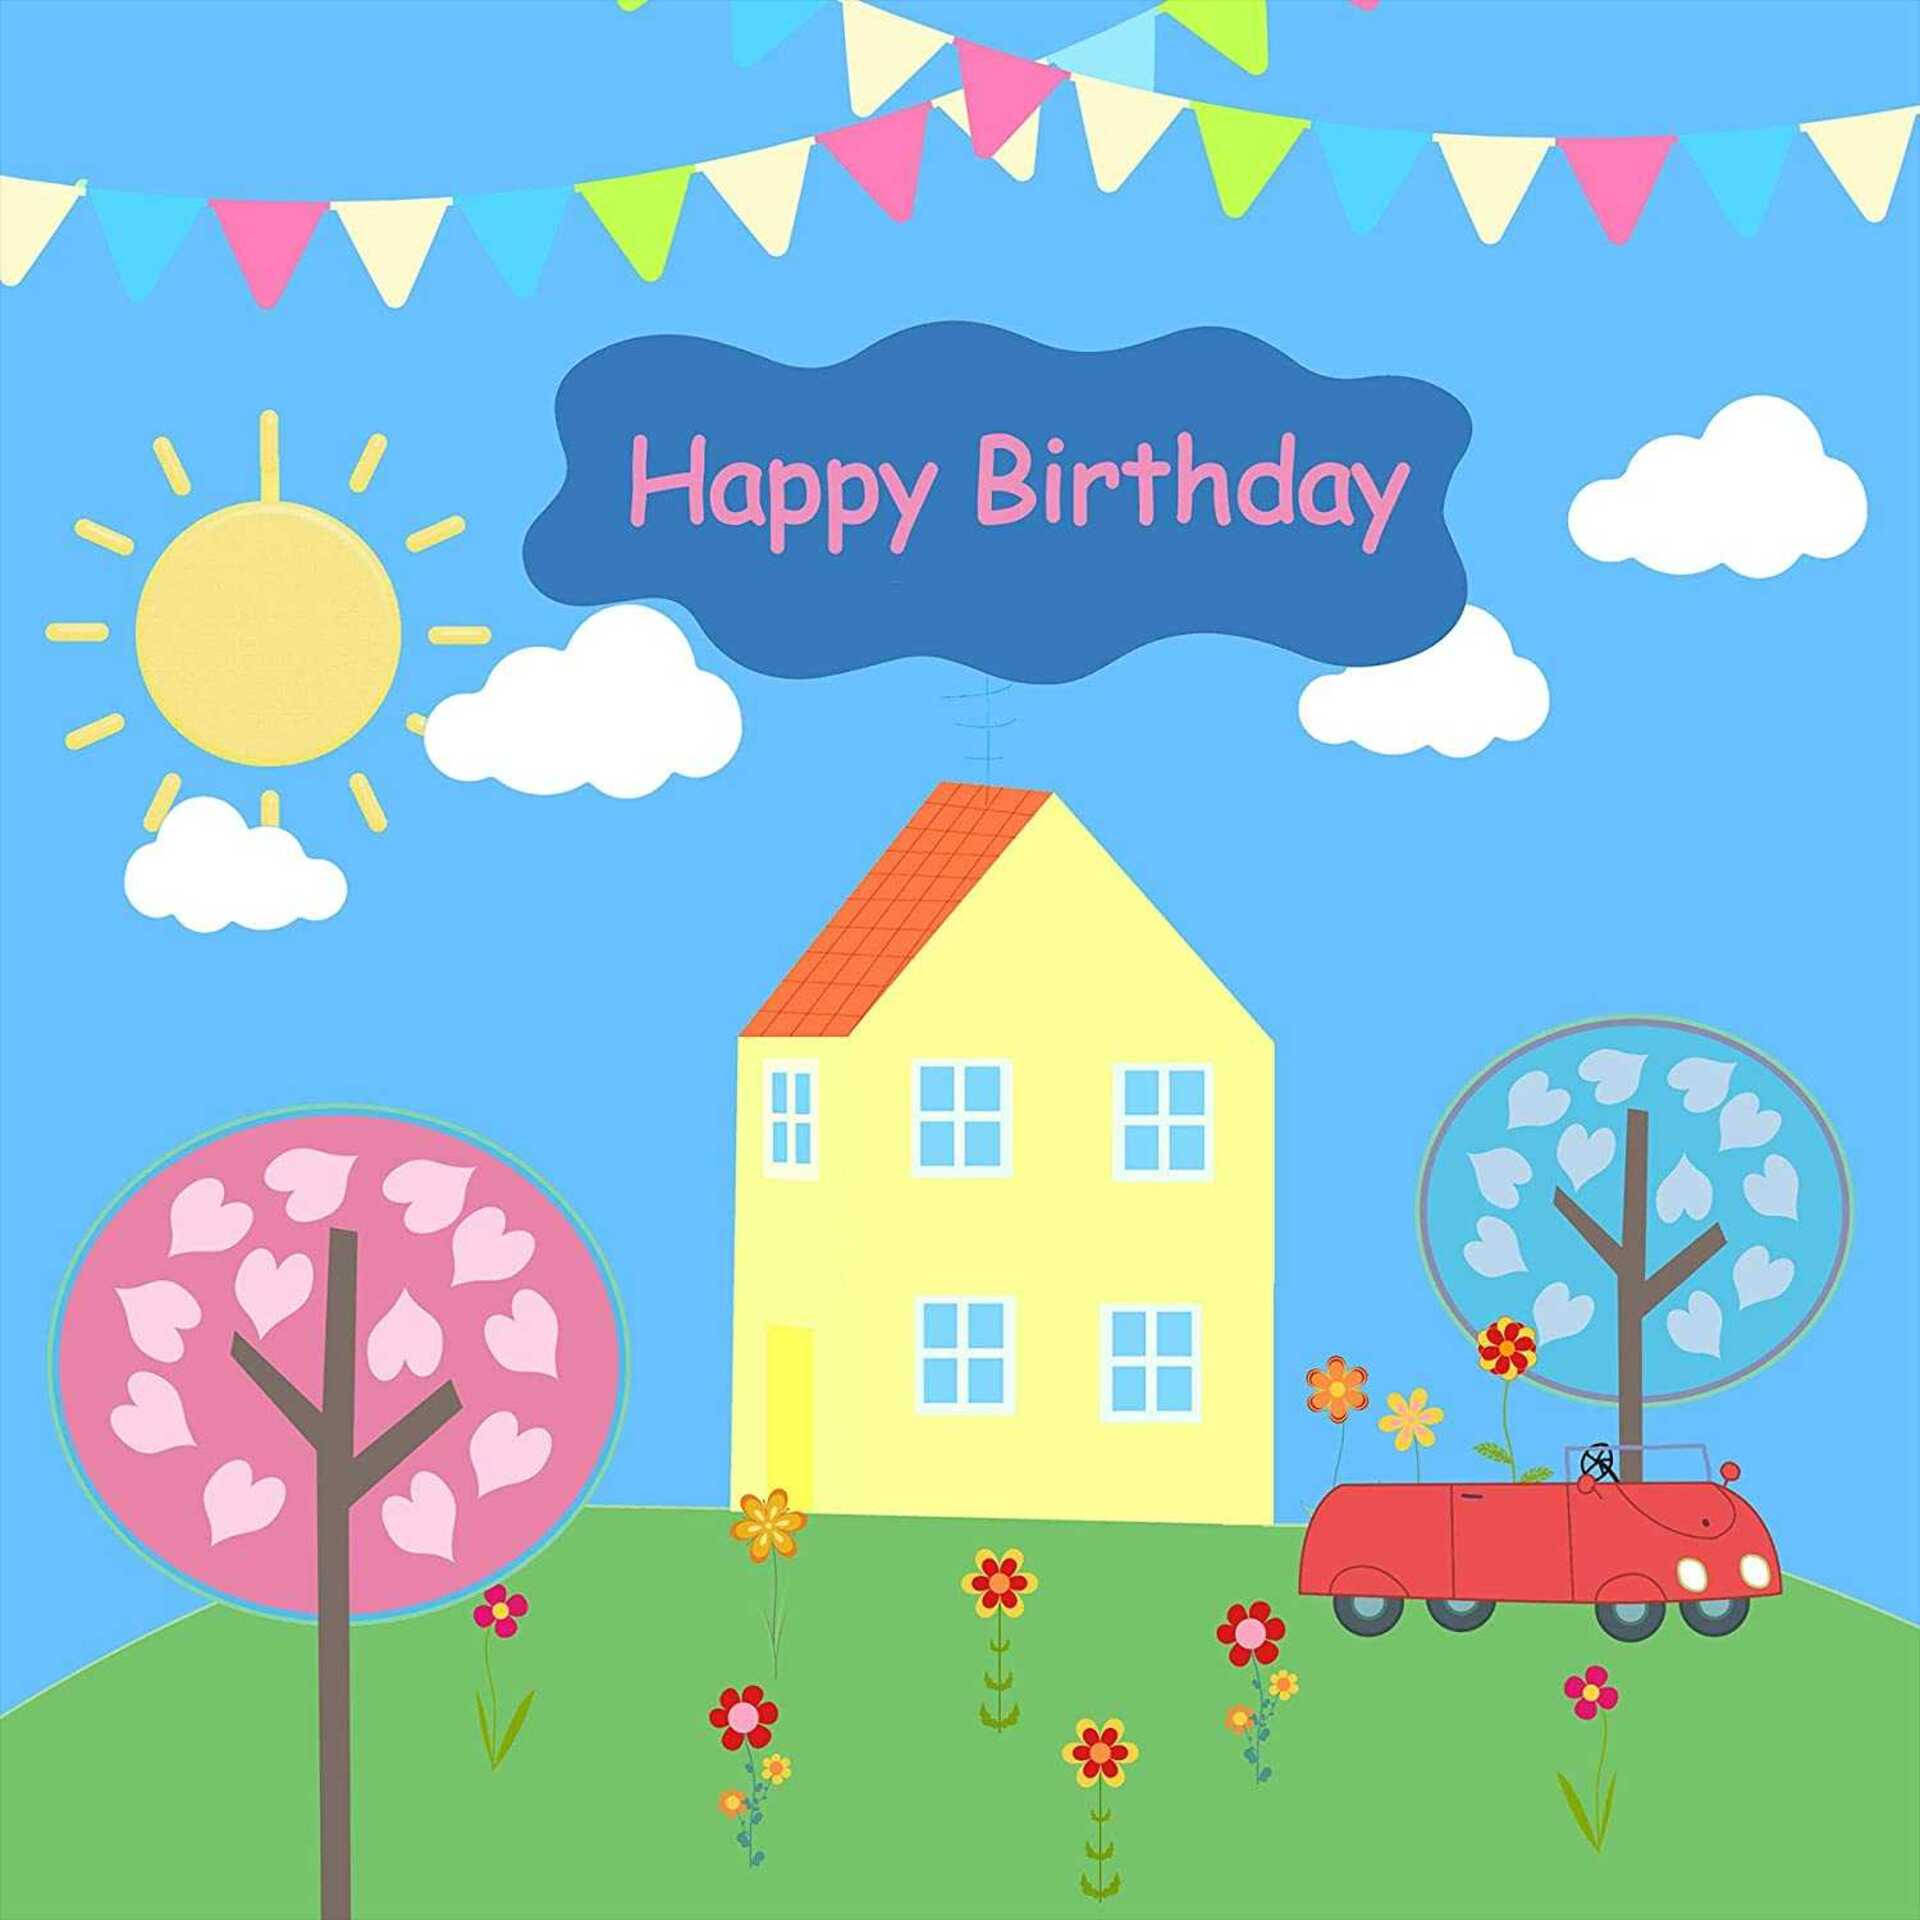 Celebrate a birthday at Peppa Pig House Wallpaper